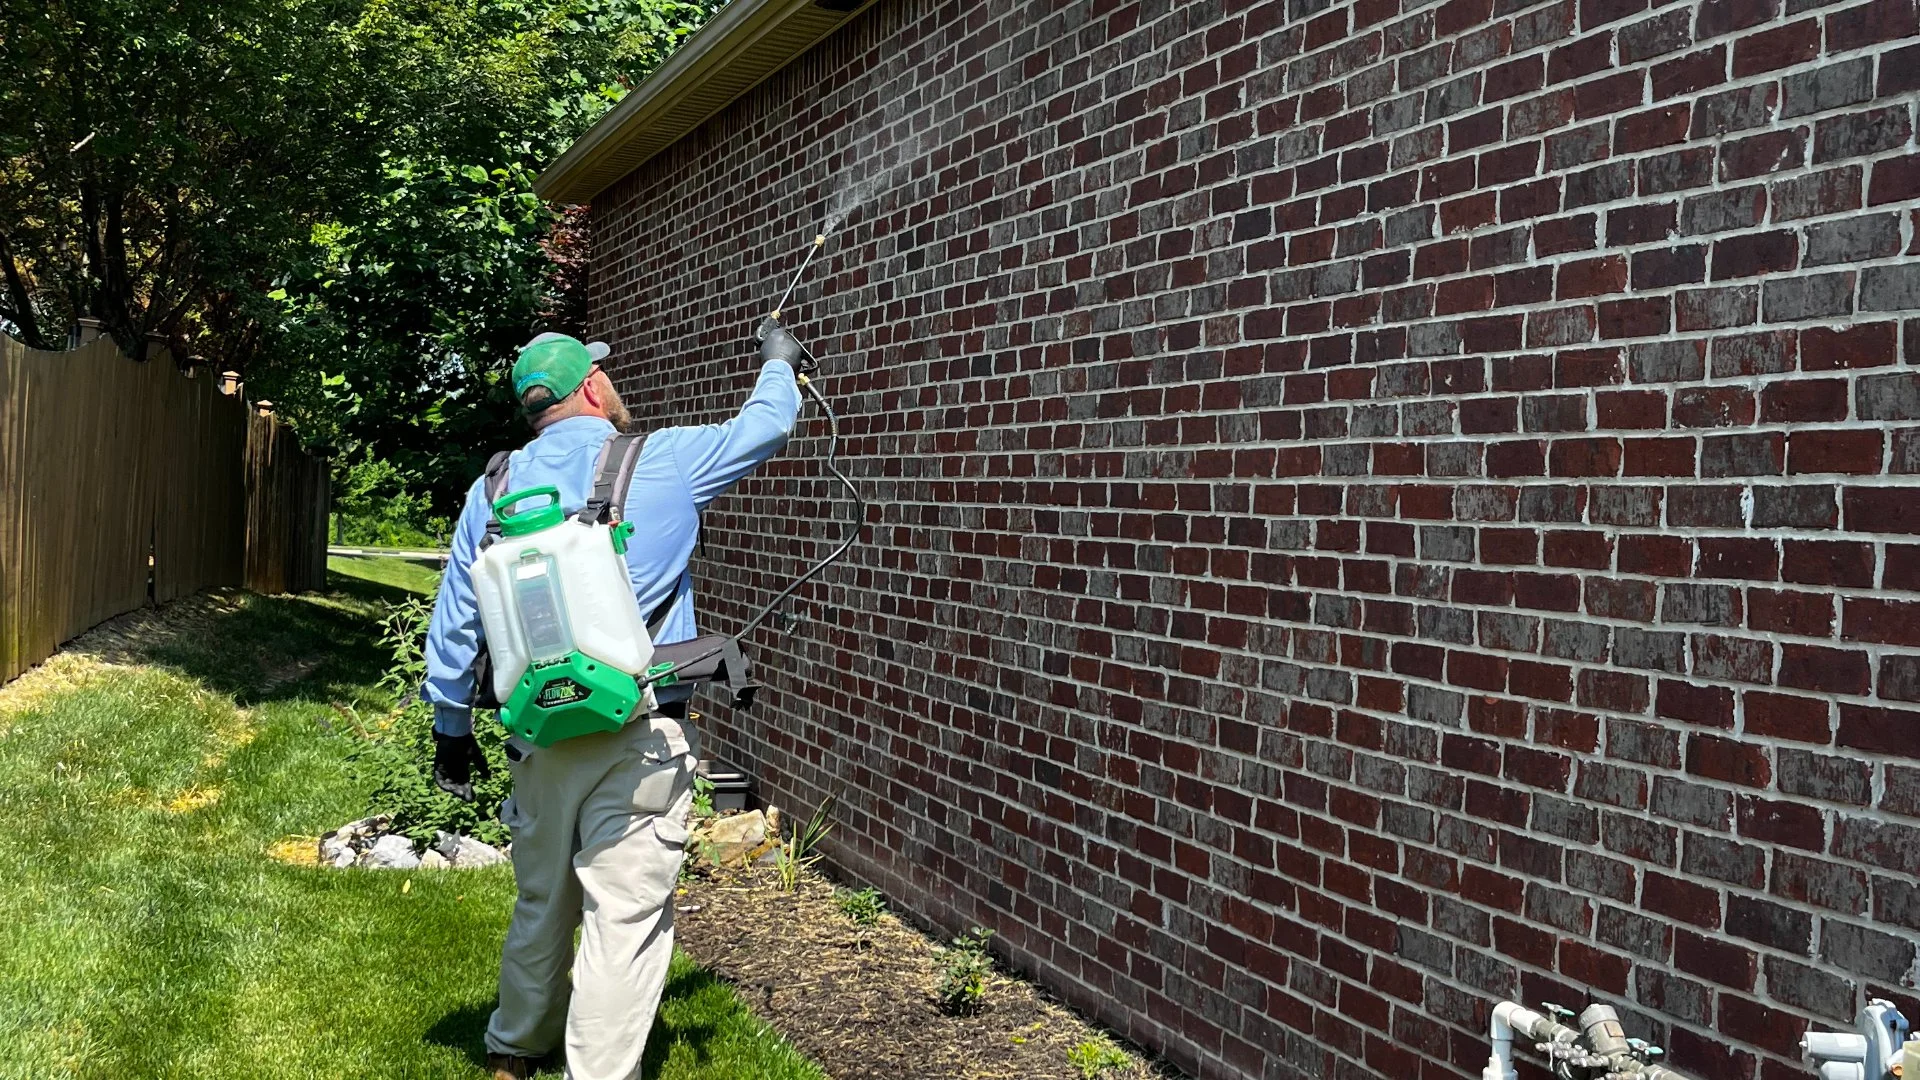 Maintaining a Pest-Free Indoor Space Starts With Your House's Exterior